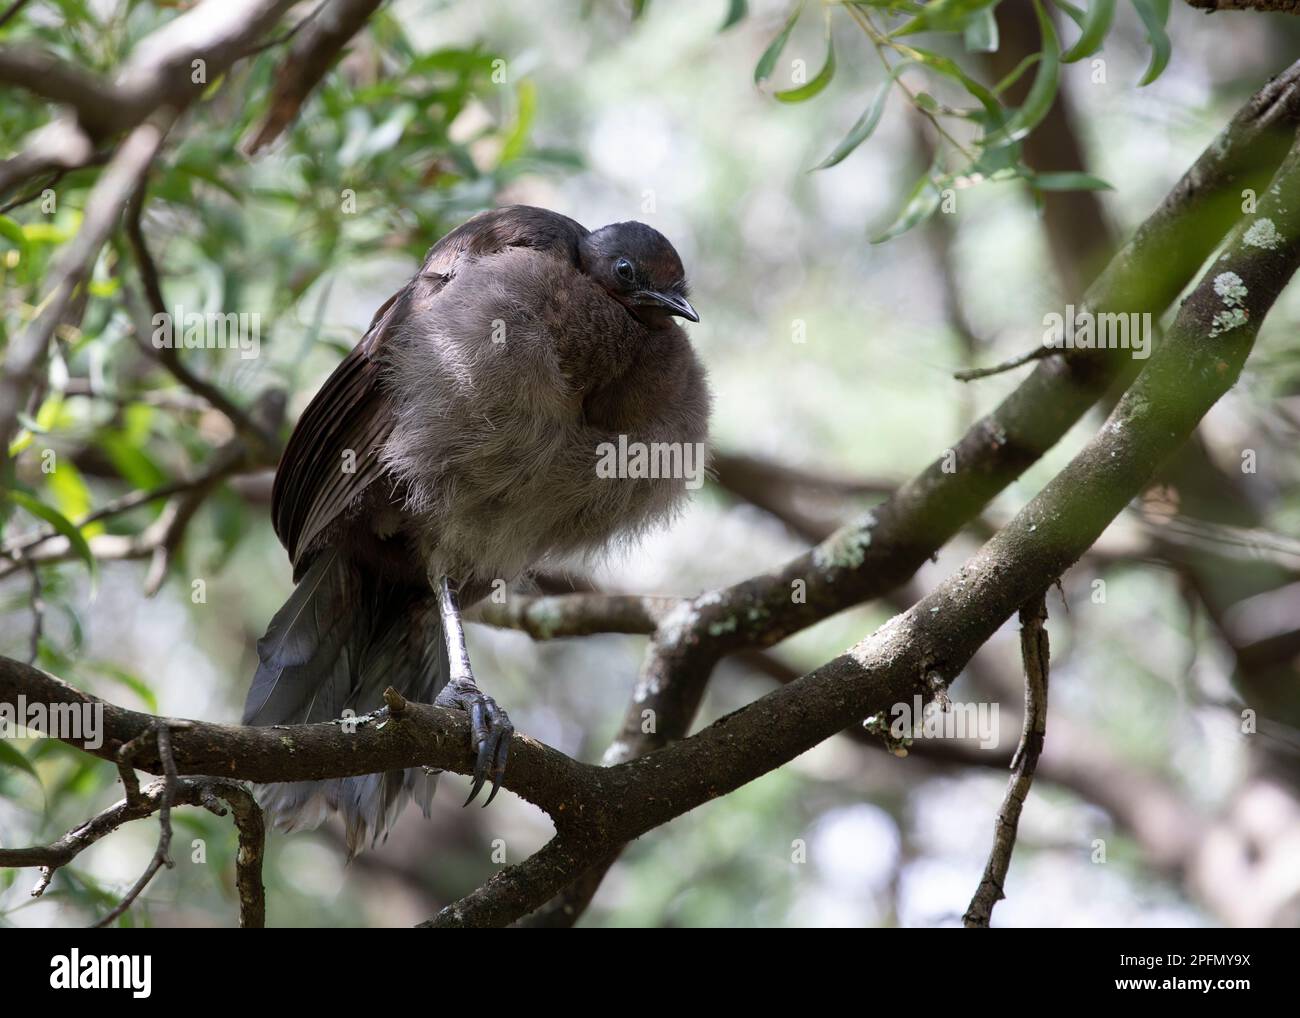 Baby Lyrebird with down feathers, perched on a tree, one leg tucked up, sleeping. Stock Photo